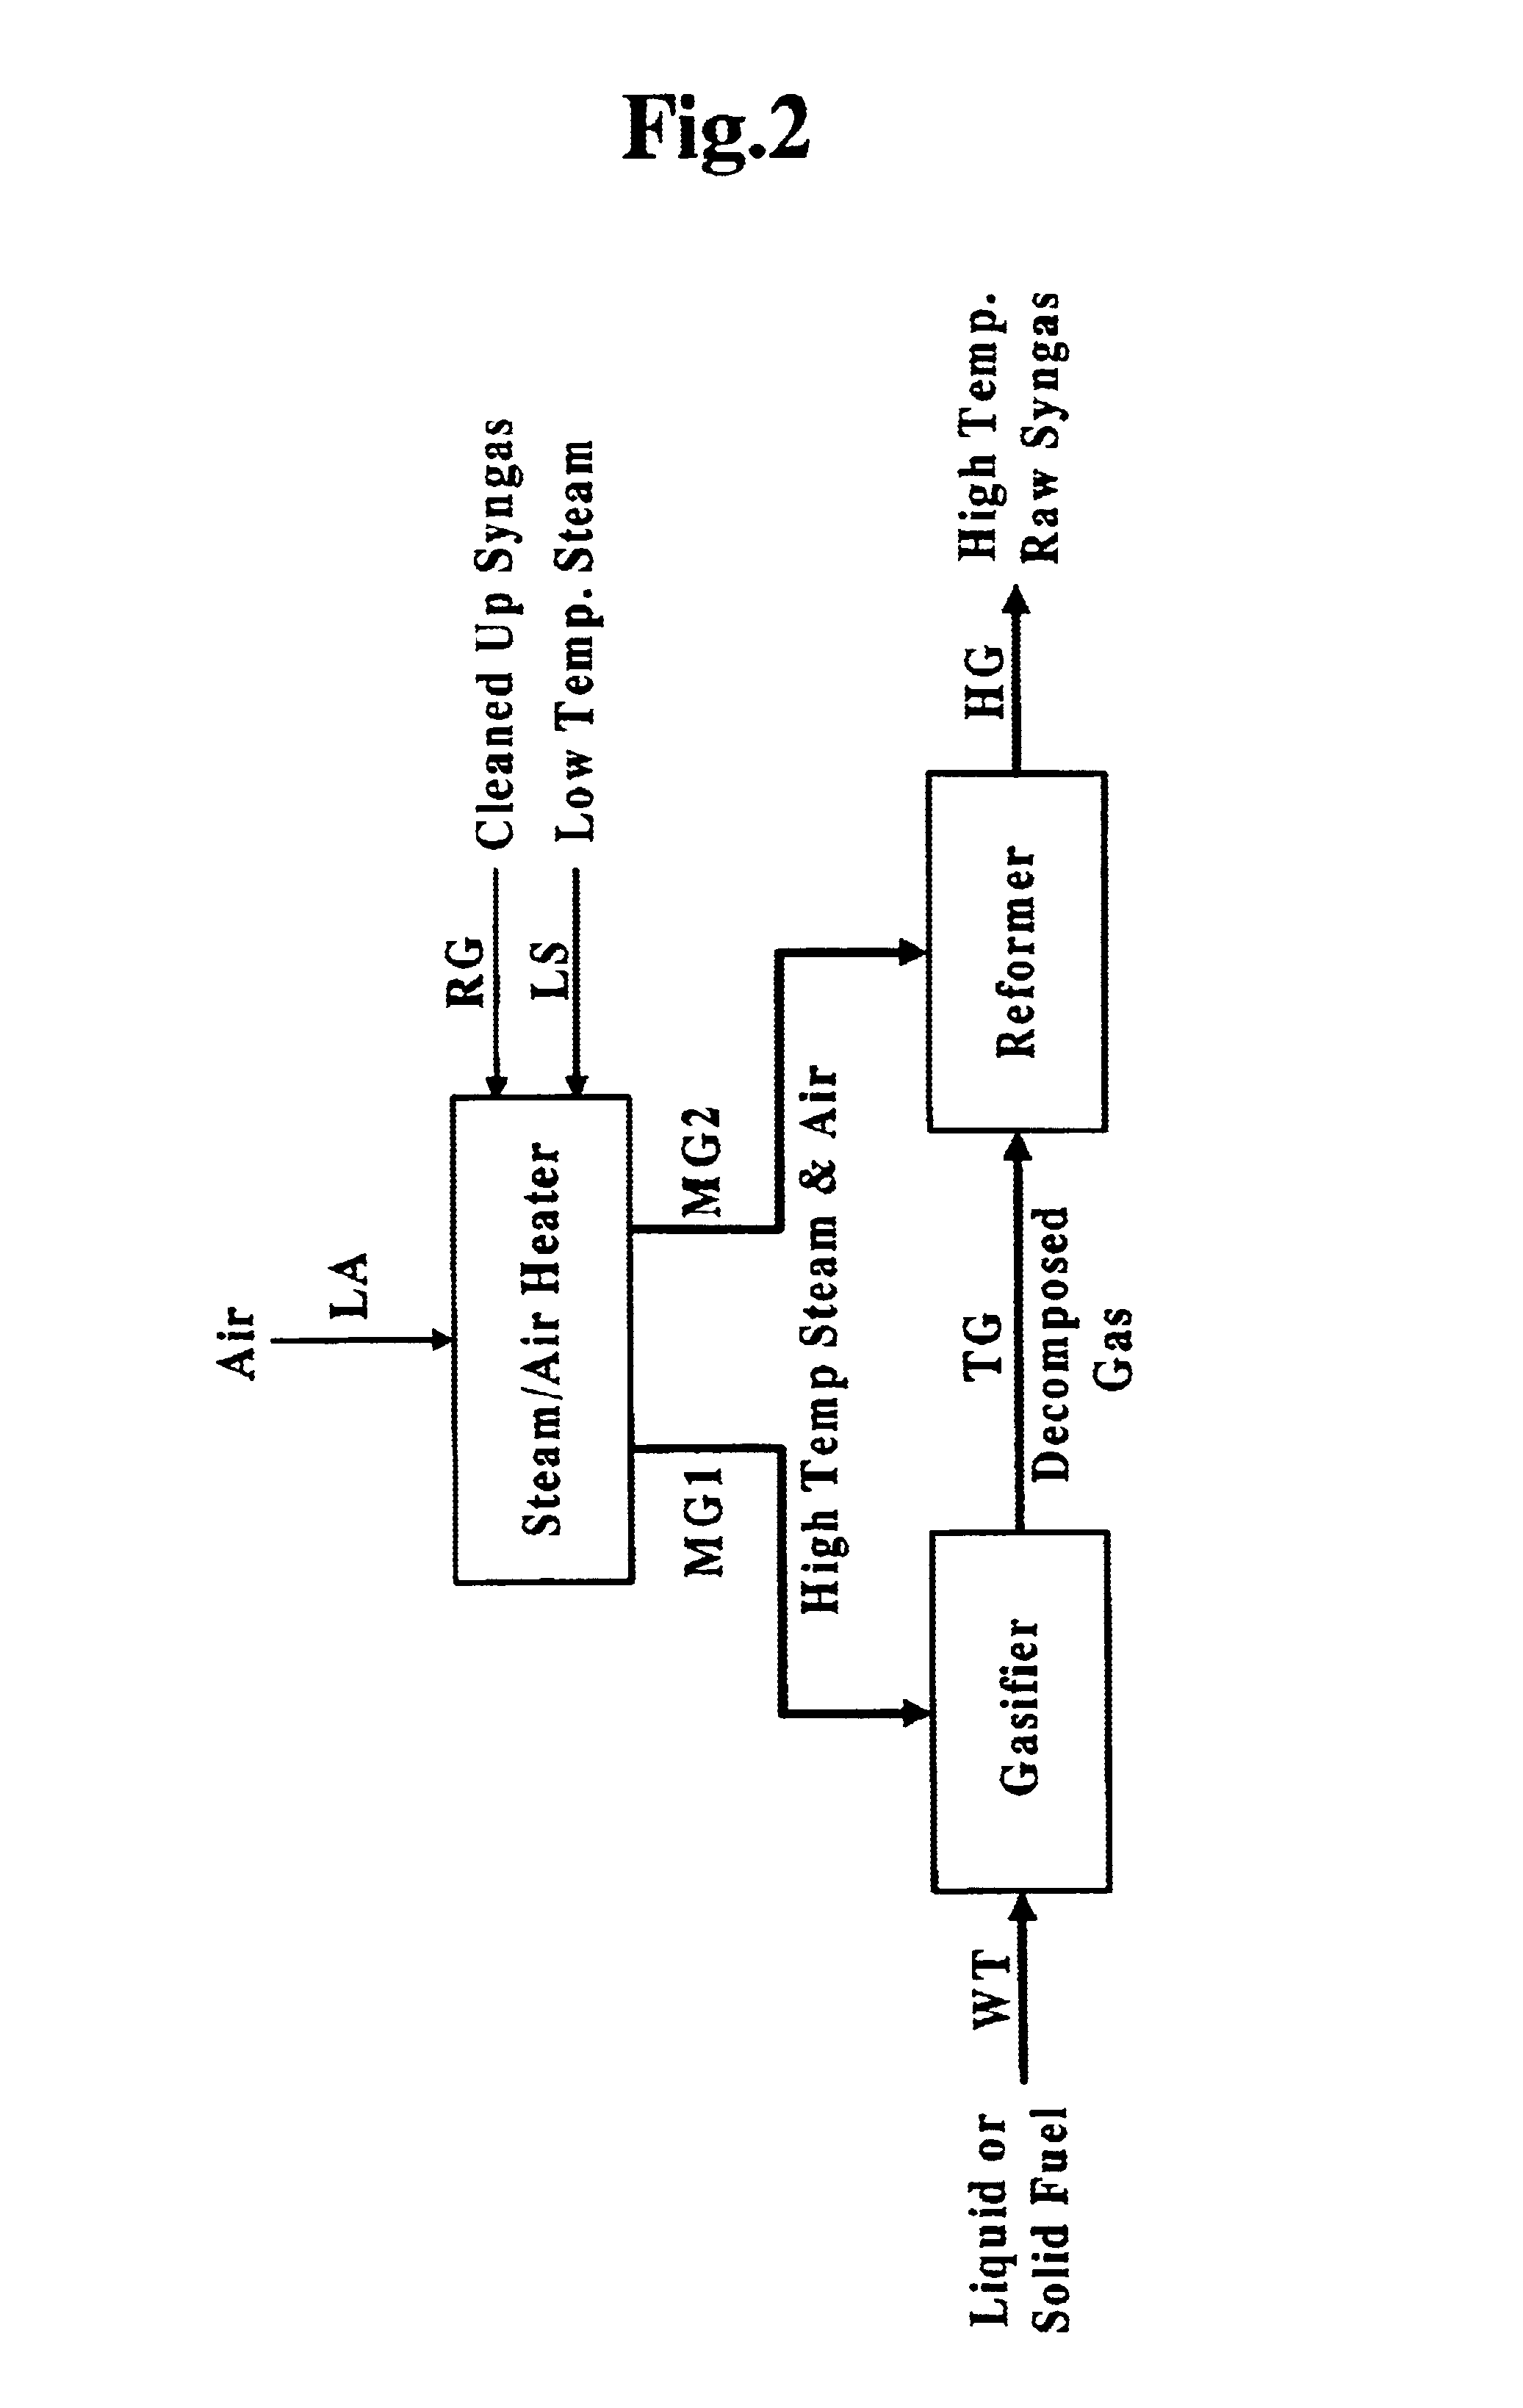 Apparatus and method for gasifying liquid or solid fuel